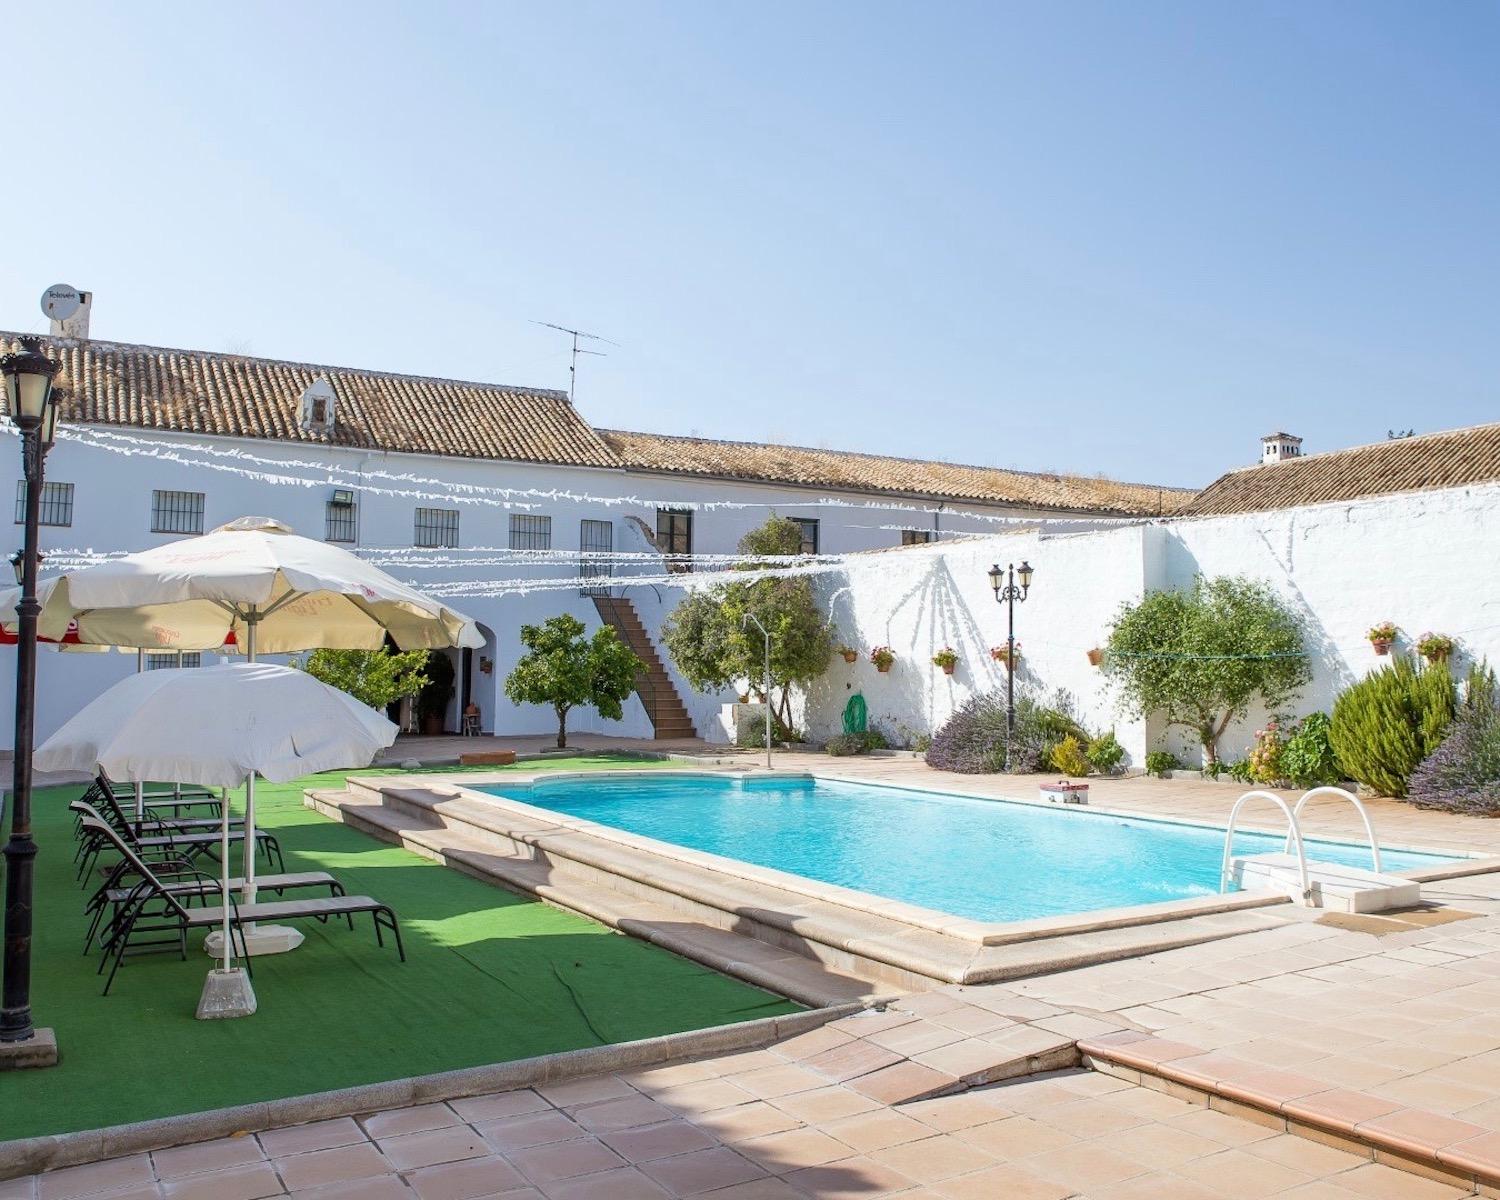 Authentic Andalucian Rural Hotel